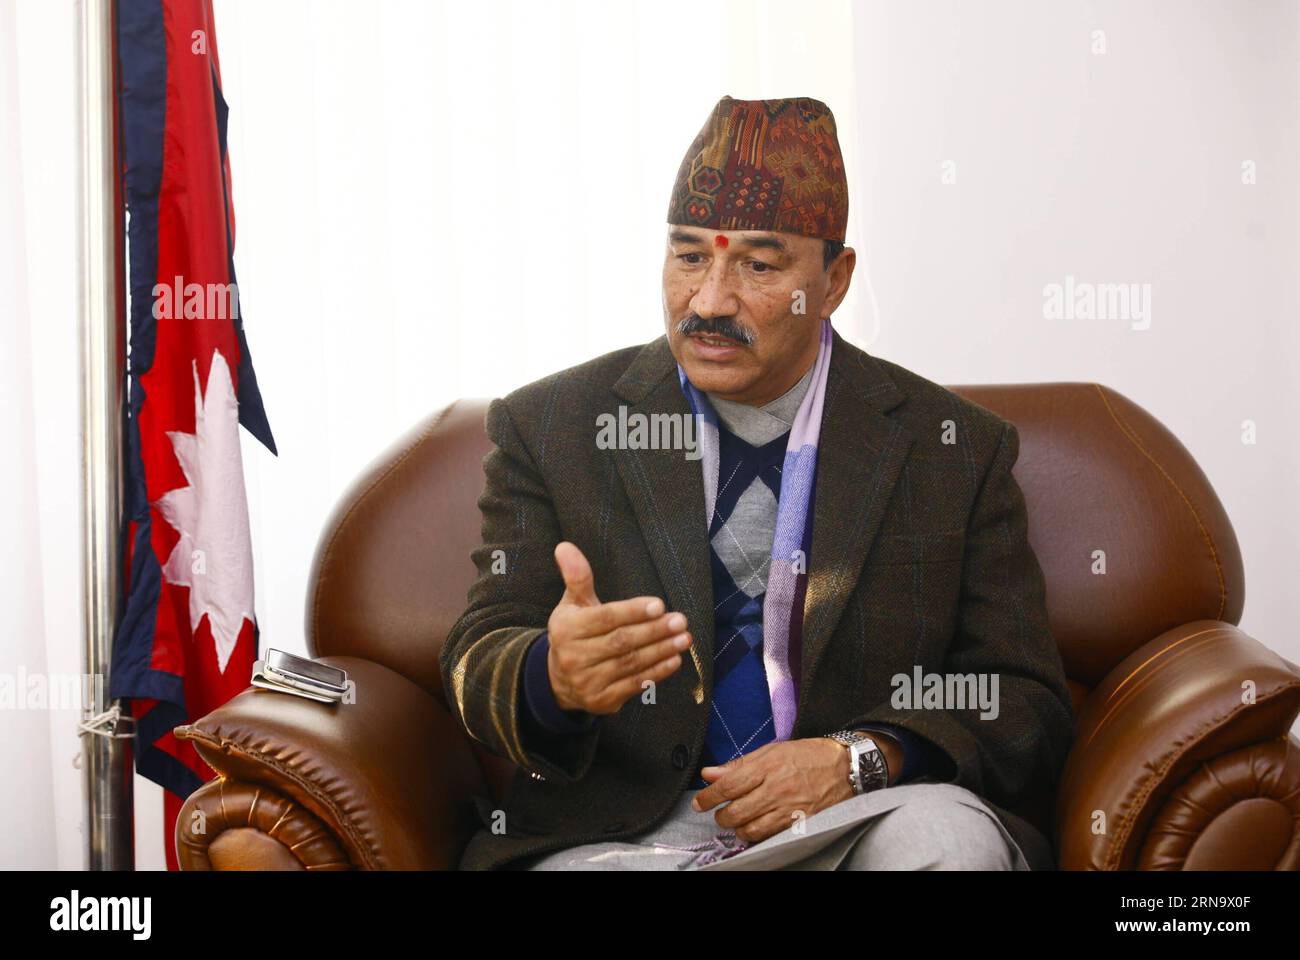 (151222) -- KATHMANDU, Dec. 22, 2015 -- Nepal s Deputy Prime Minister and Minister for Foreign Affairs Kamal Thapa receives an interview with Xinhua before his five-day official visit to China, in Kathmandu, Nepal, Dec. 22, 2015. Kamal Thapa will leave for China on Wednesday. During the visit, Nepal is expected to seal a trade and transit agreement with China as well as finalize the details for importing petroleum products from the northern neighbor on a commercial basis. ) NEPAL-KATHMANDU-DEPUTY PM-INTERVIEW PratapxThapa PUBLICATIONxNOTxINxCHN   151222 Kathmandu DEC 22 2015 Nepal S Deputy Pri Stock Photo